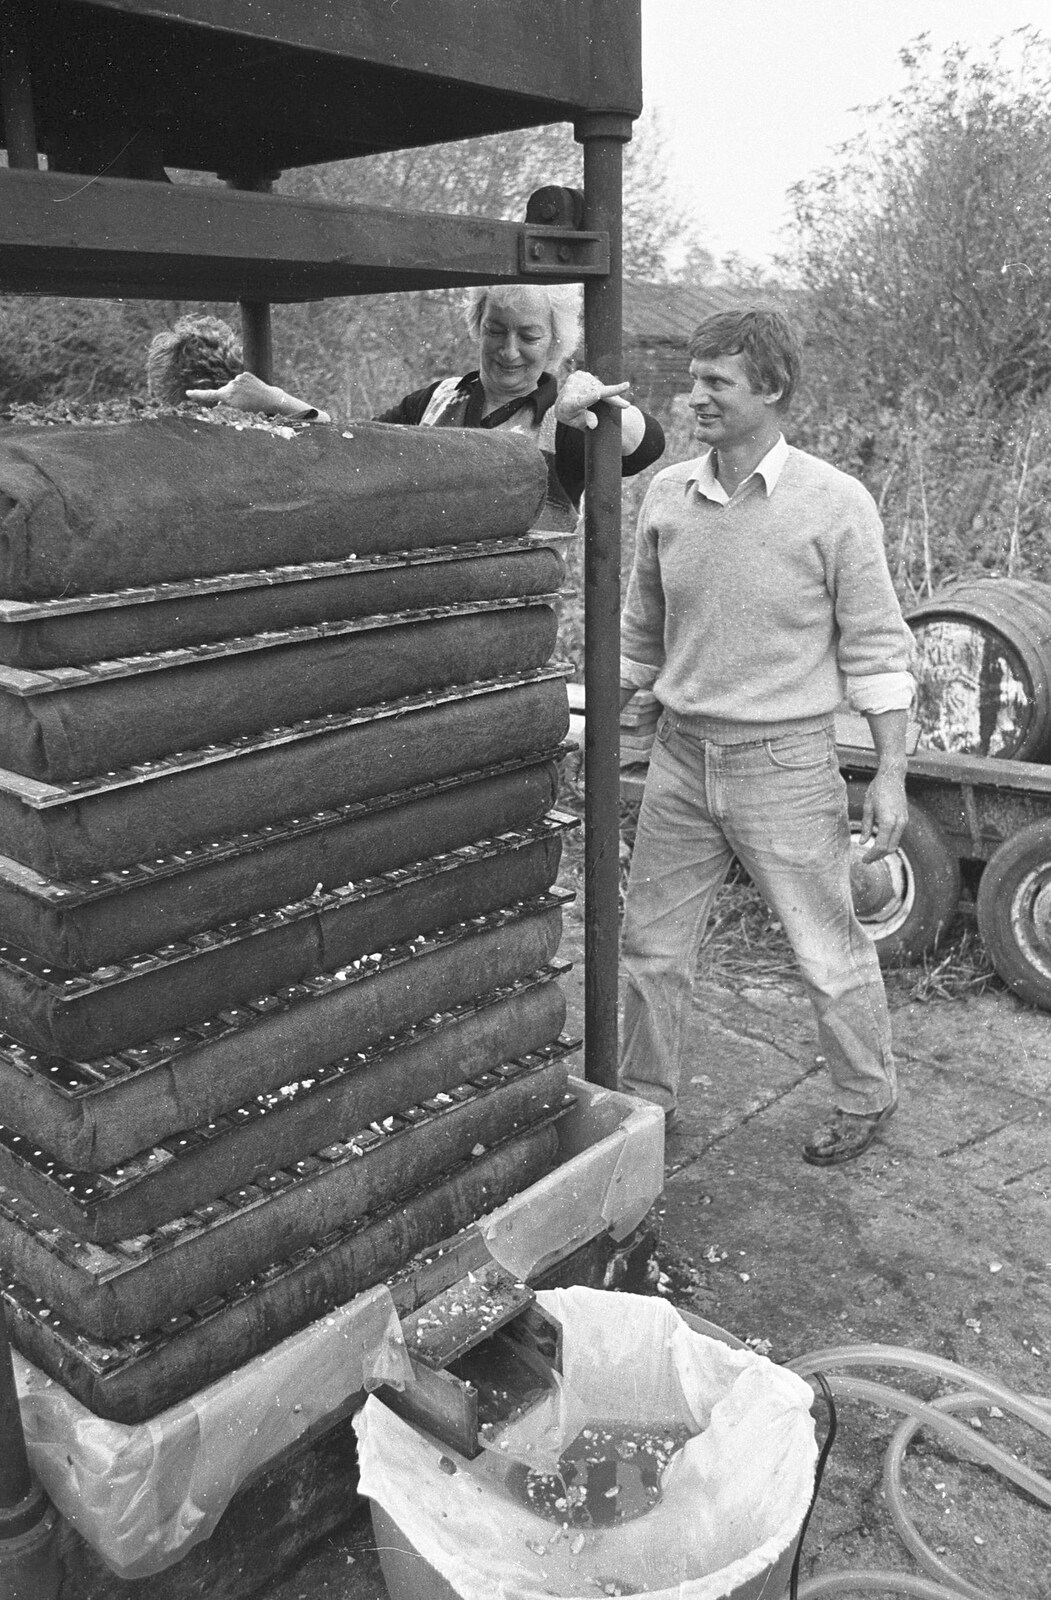 The ten cheeses are ready for pressing from Cider Making in Black and White, Stuston, Suffolk - 11th October 1992